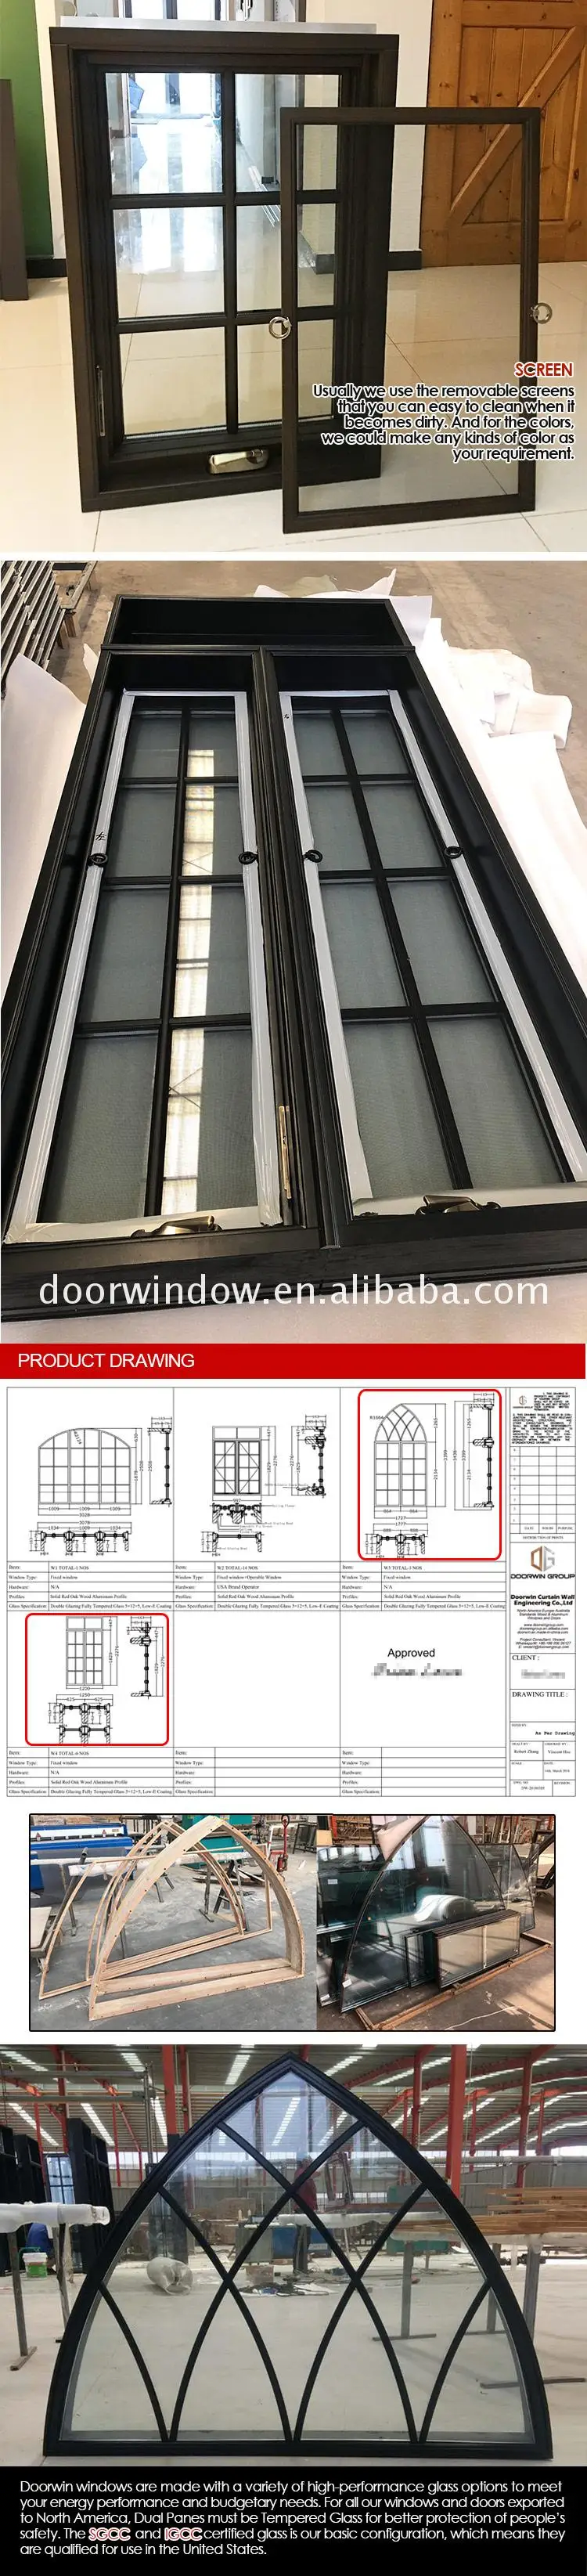 Crank window with double glazing swing out casement windows